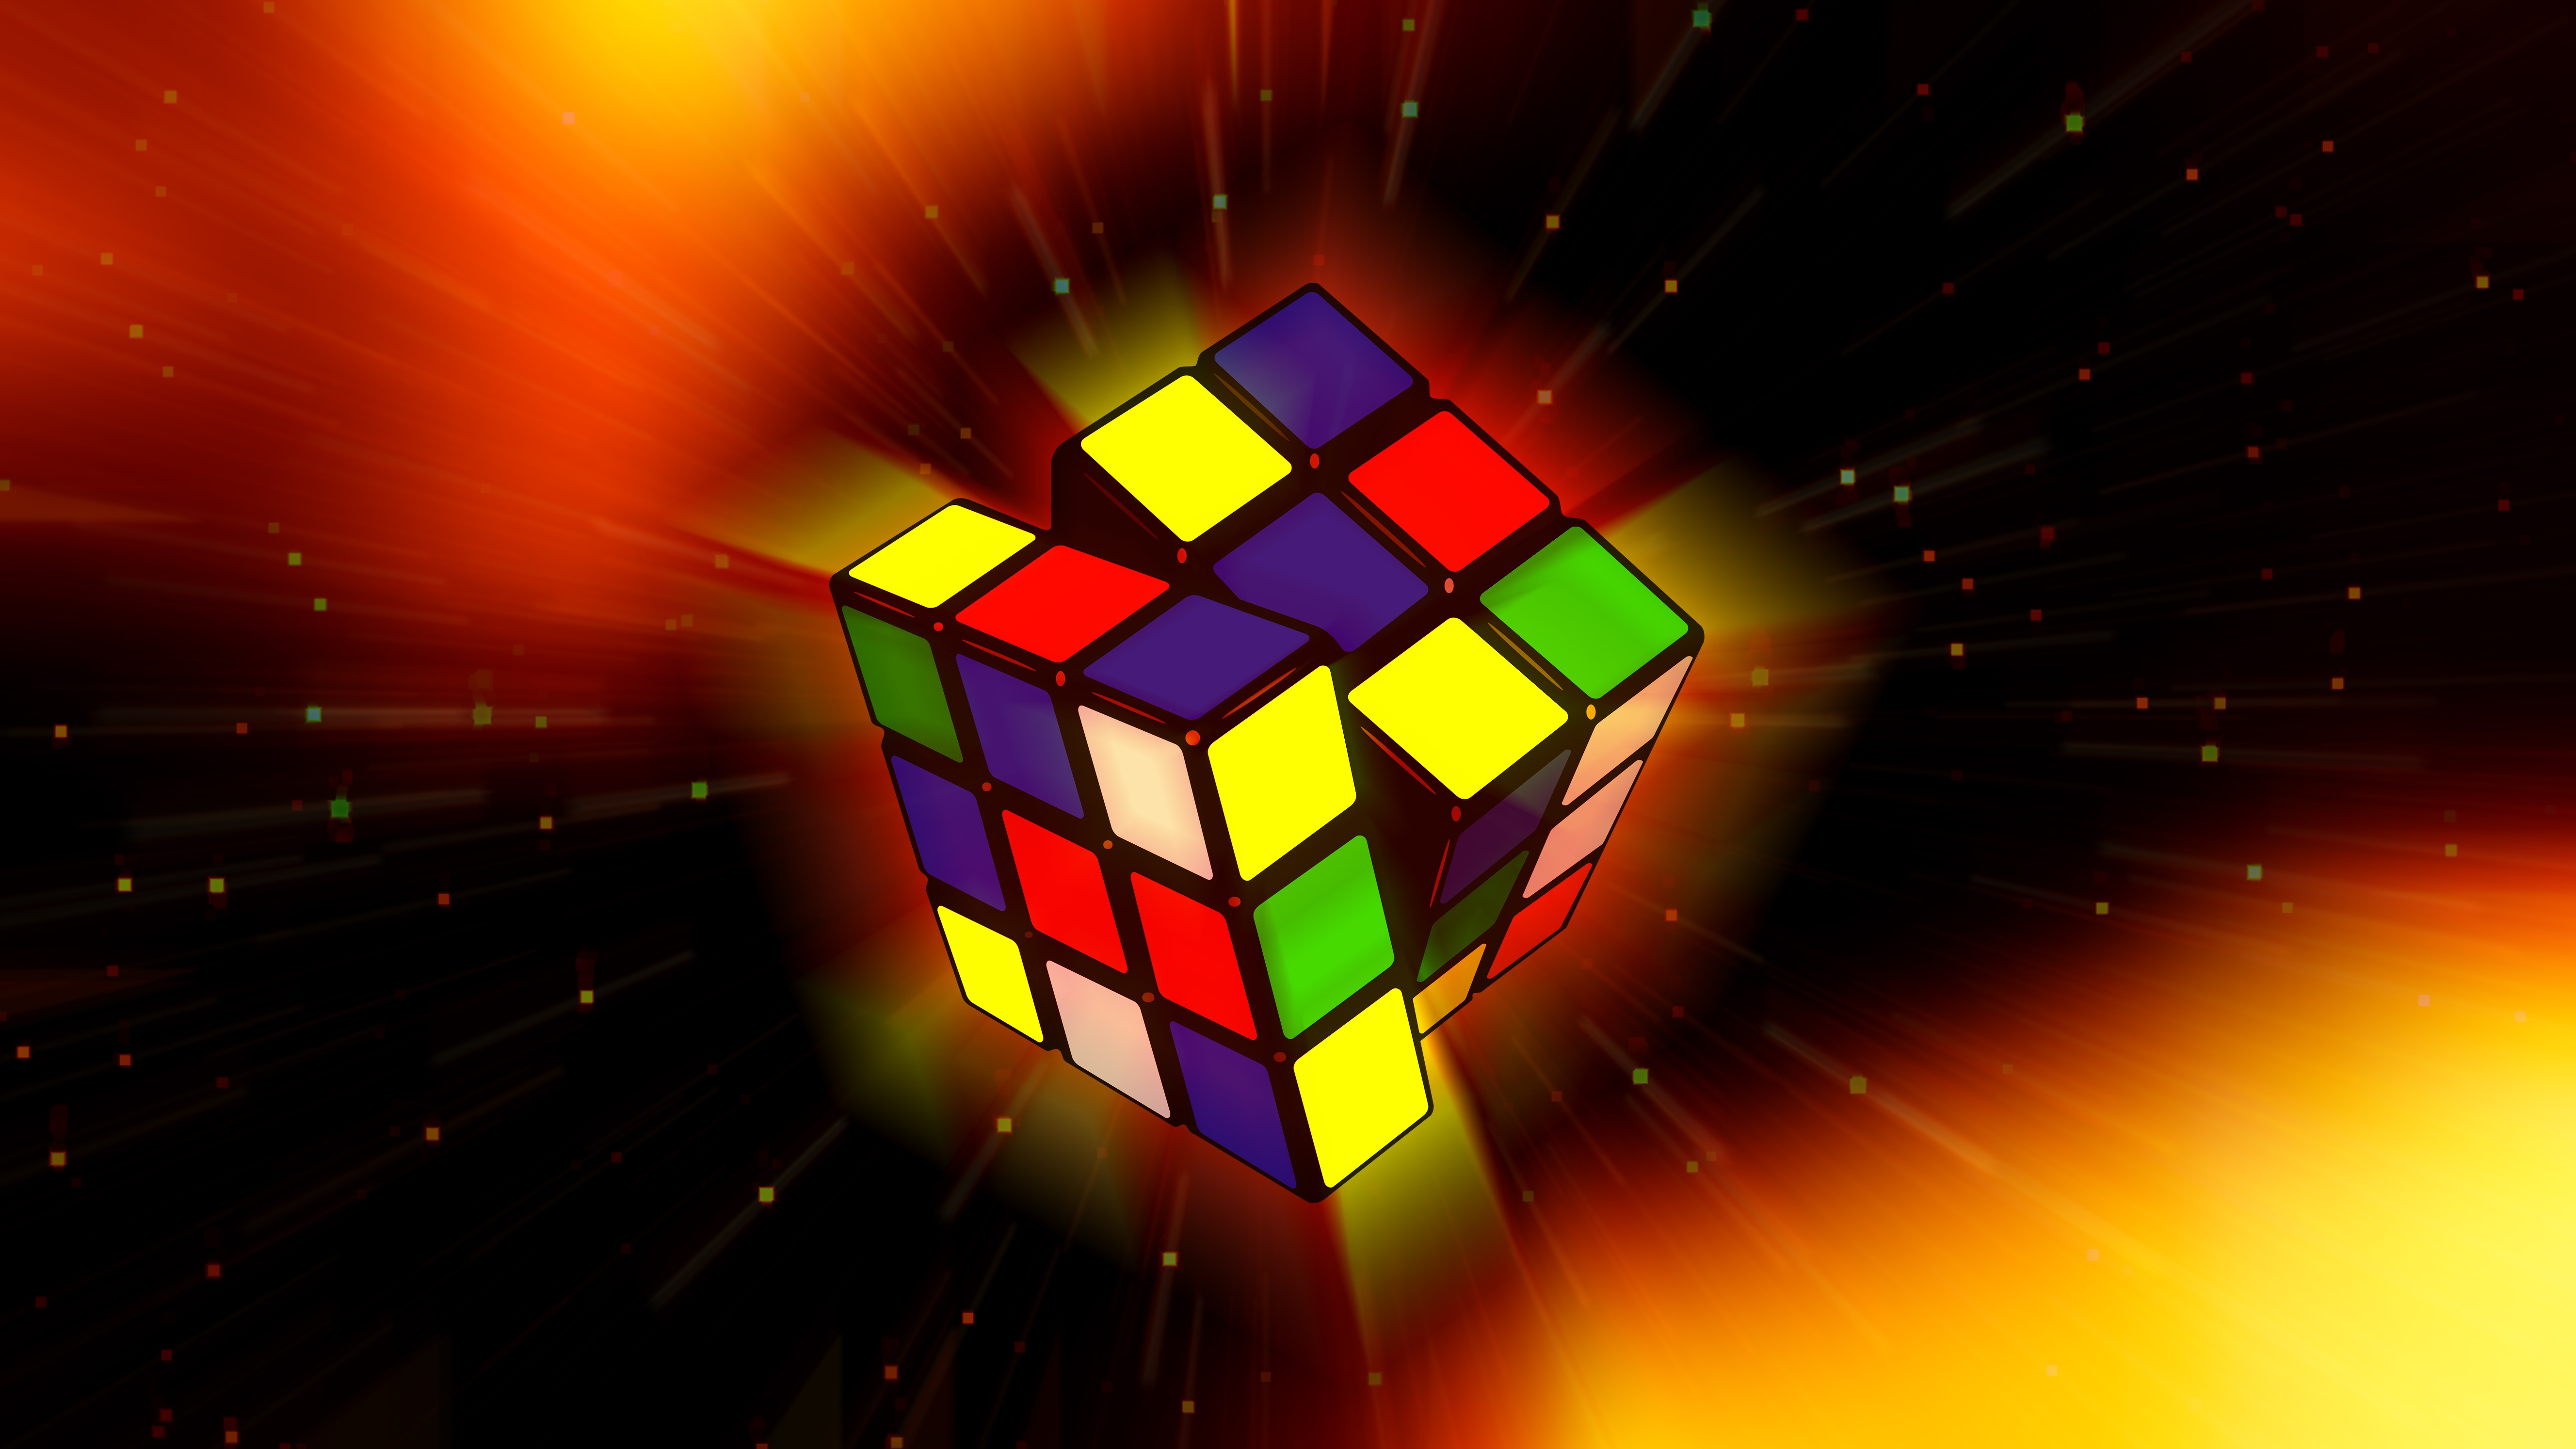 A Concentration Game Of Skill Puzzle 5k Retina Ultra HD Wallpaper